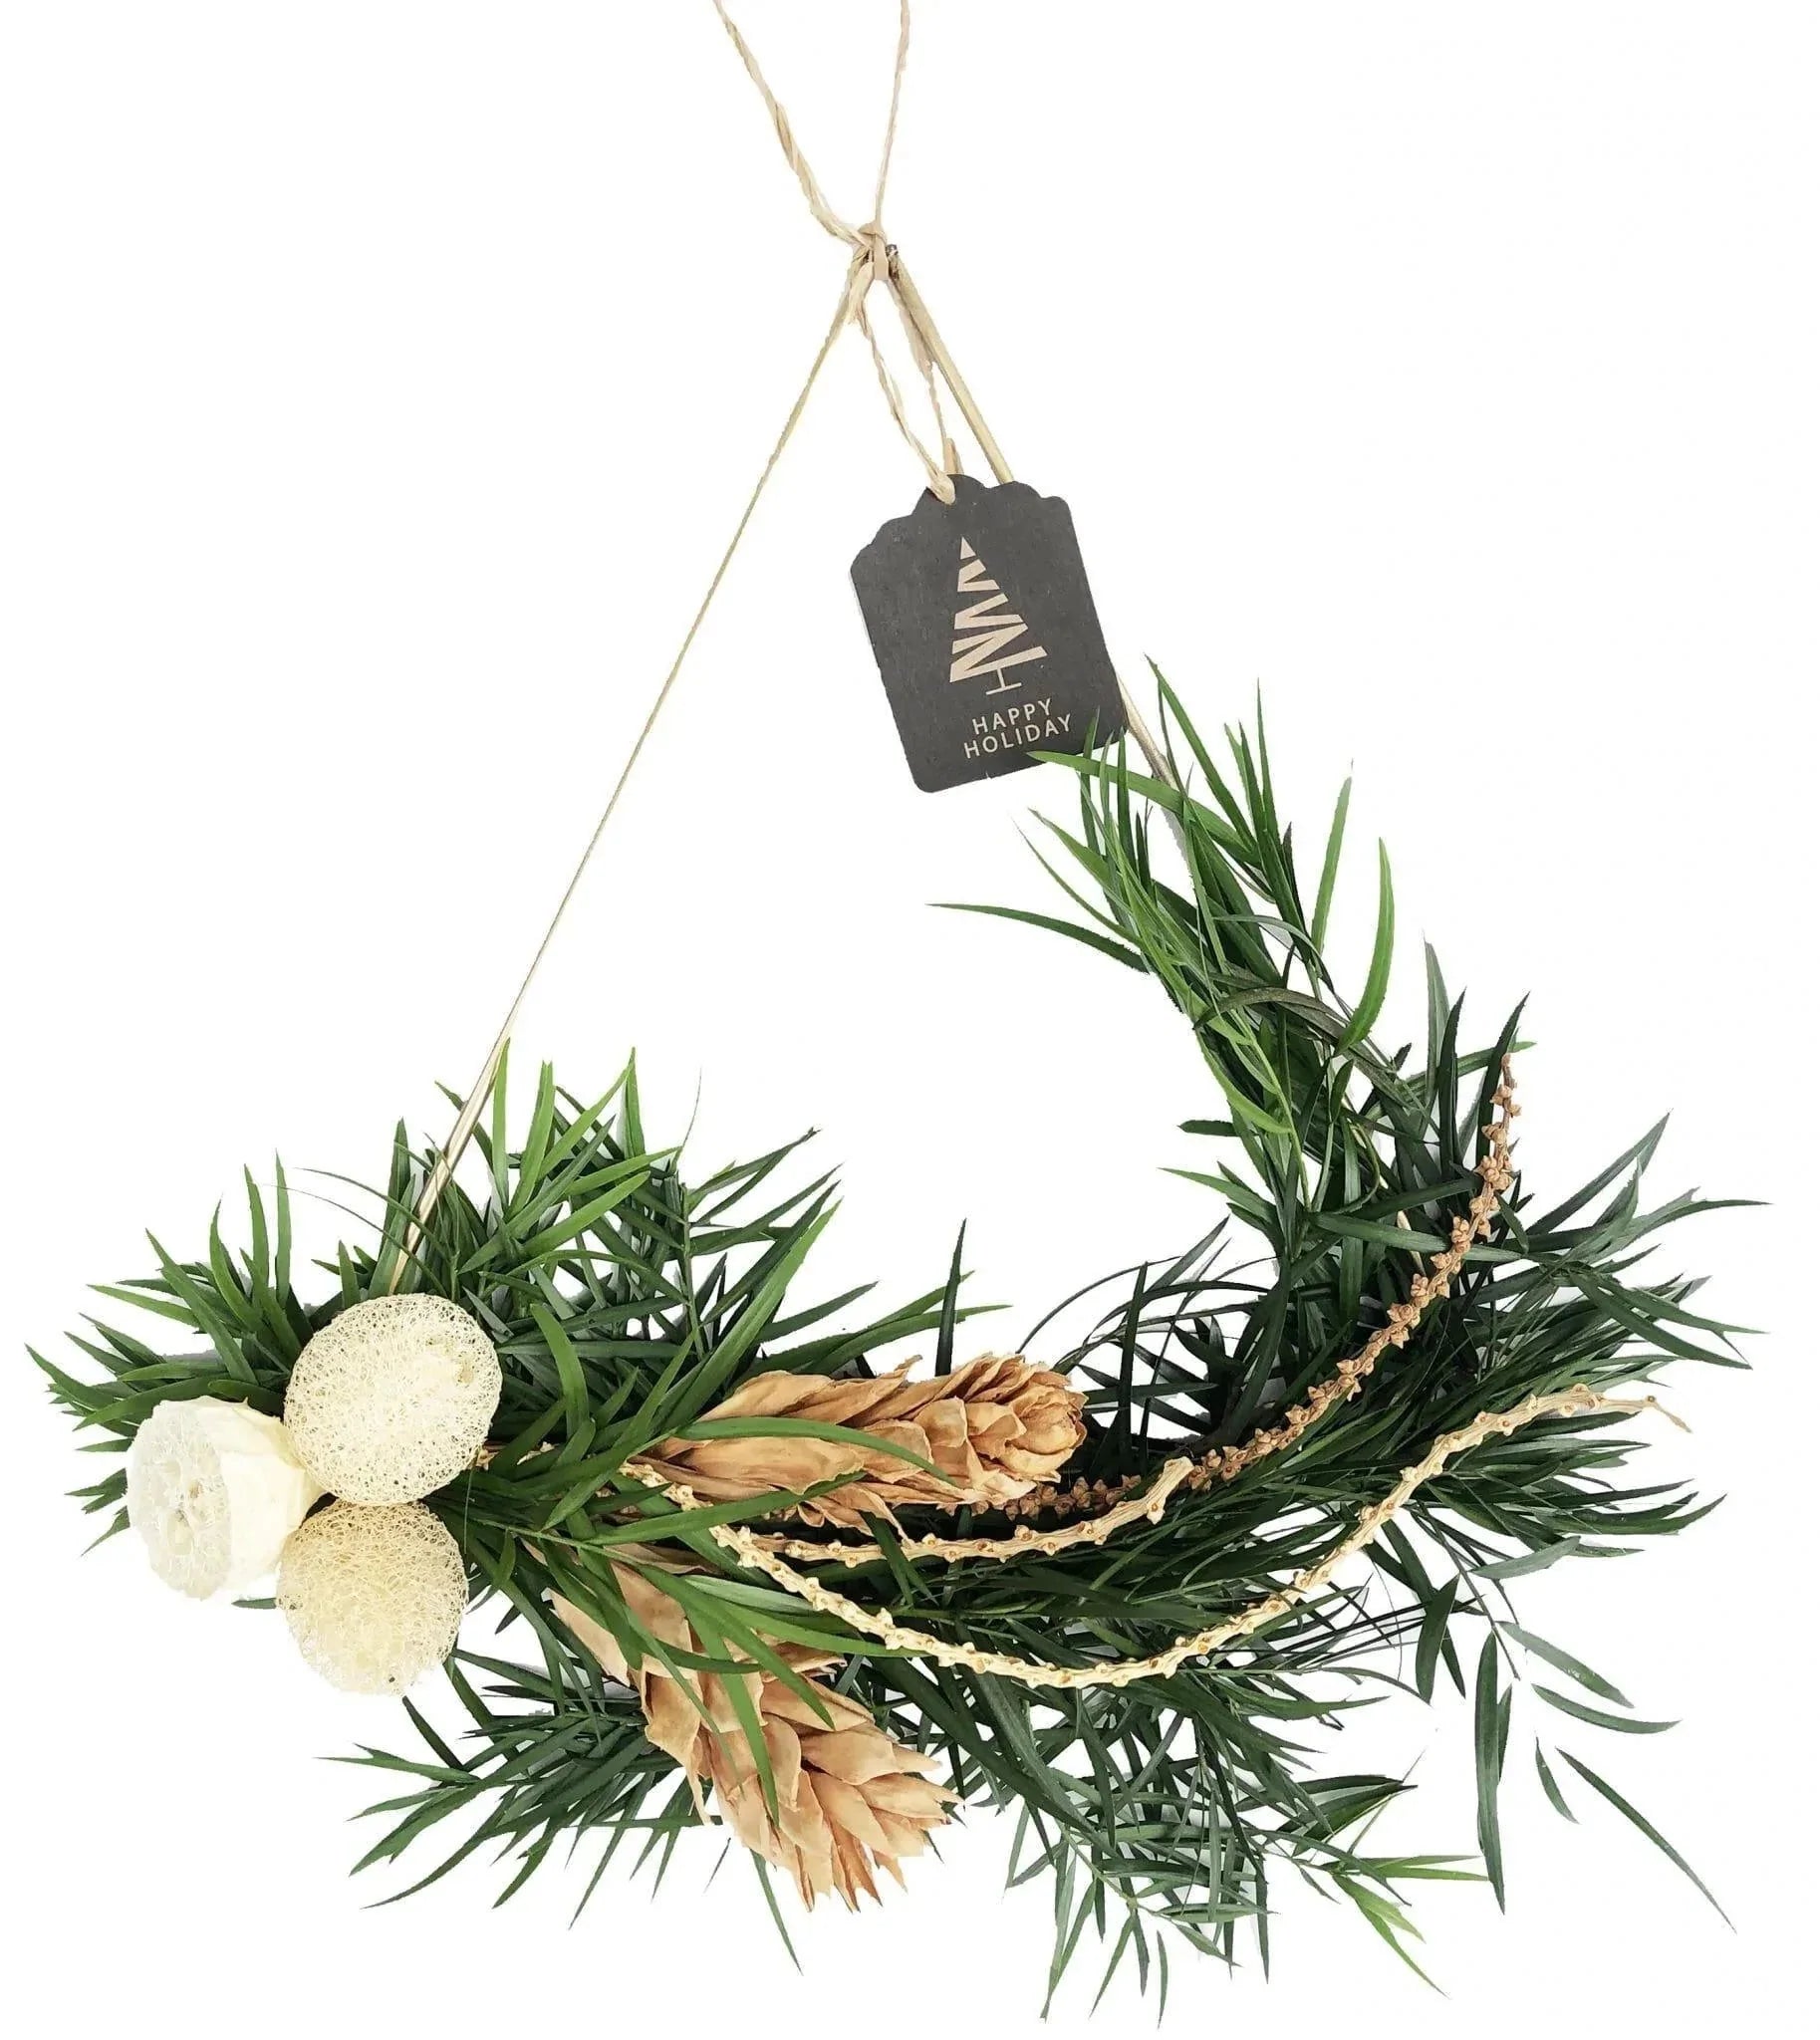 Exquisite Christmas Wreaths